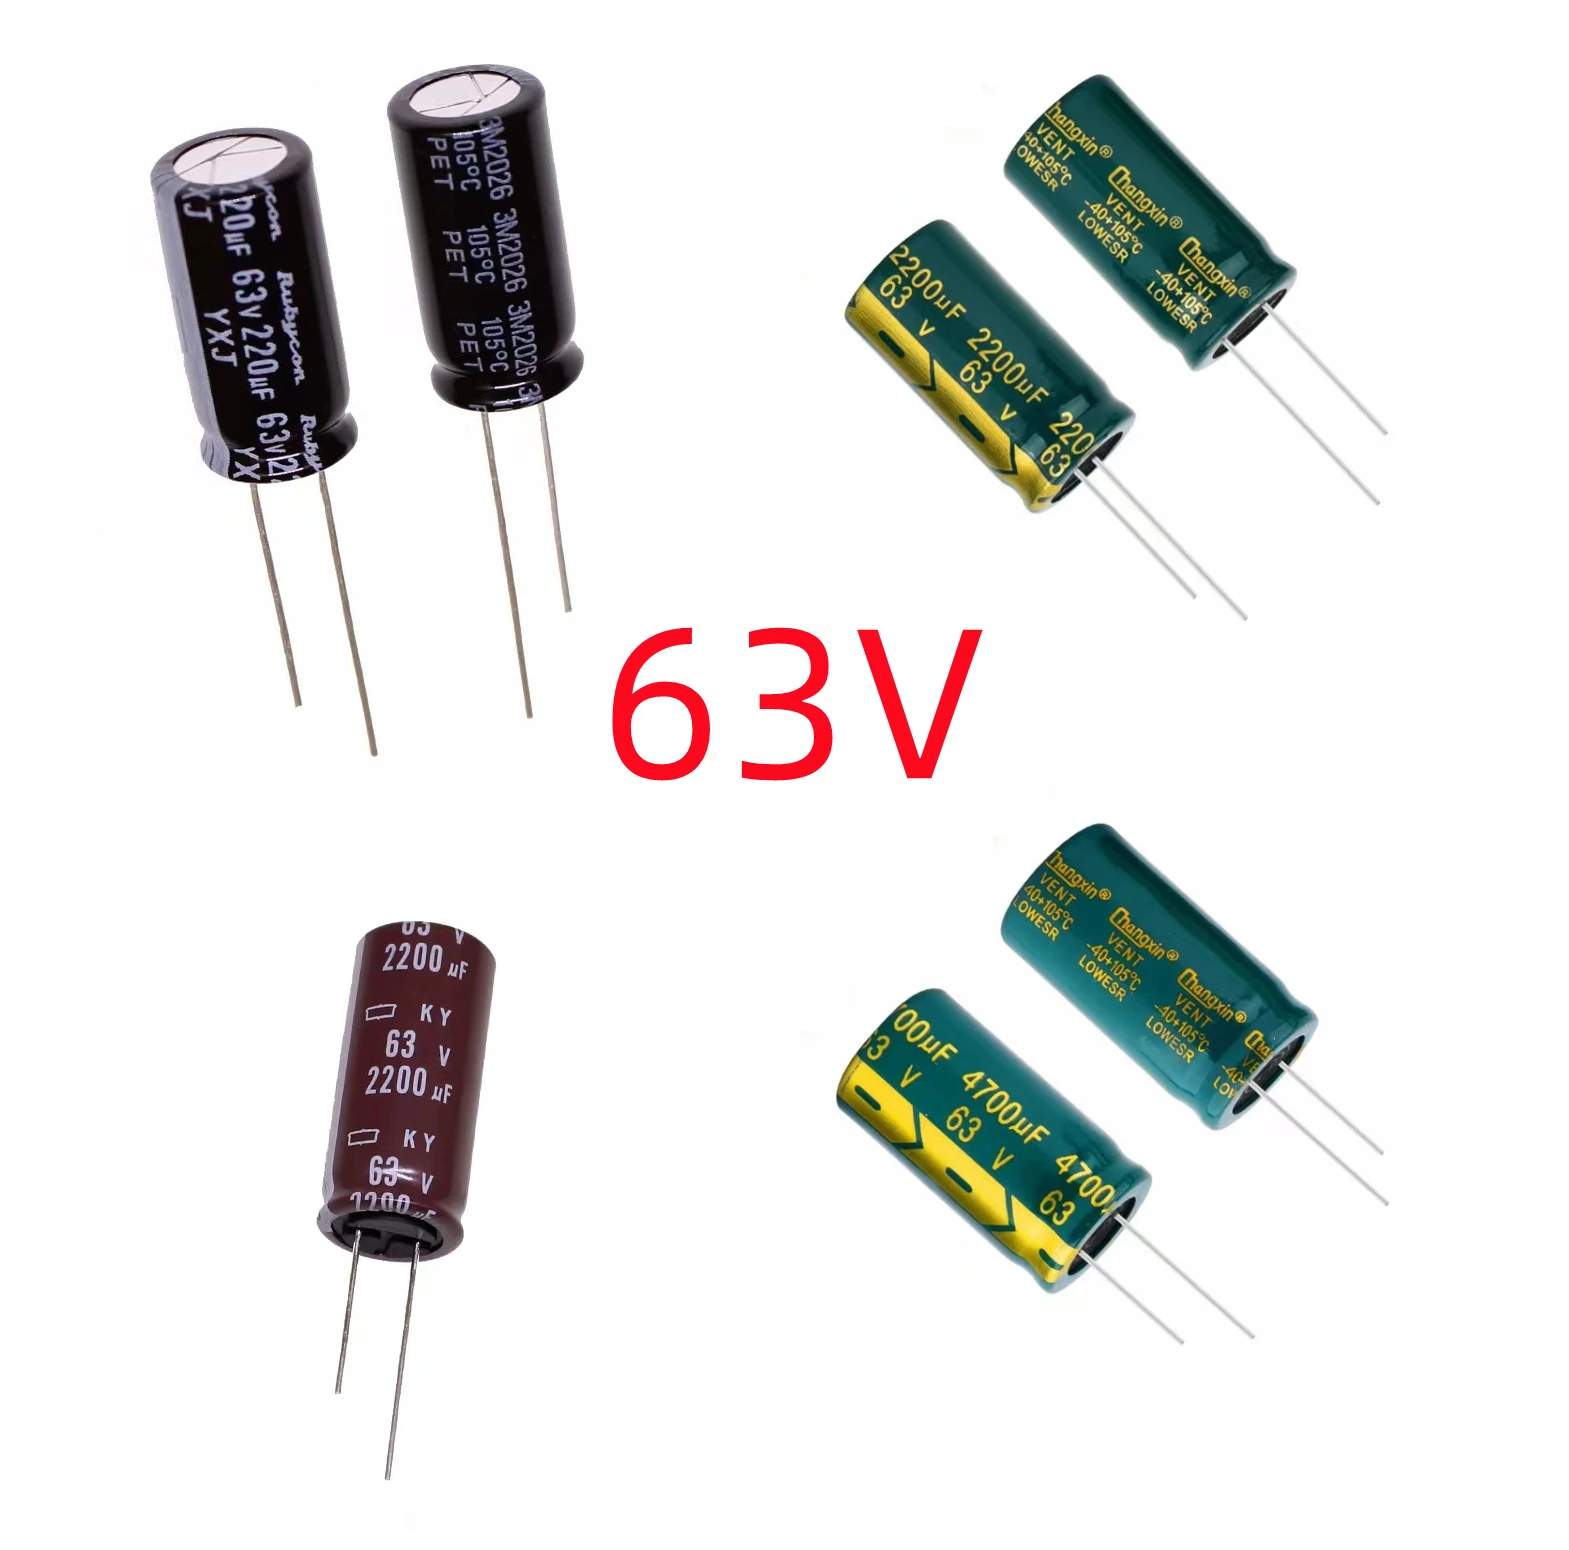 10/50/100 Pcs/Lot 63V 1uF DIP High Frequency Aluminum Electrolytic Capacitor